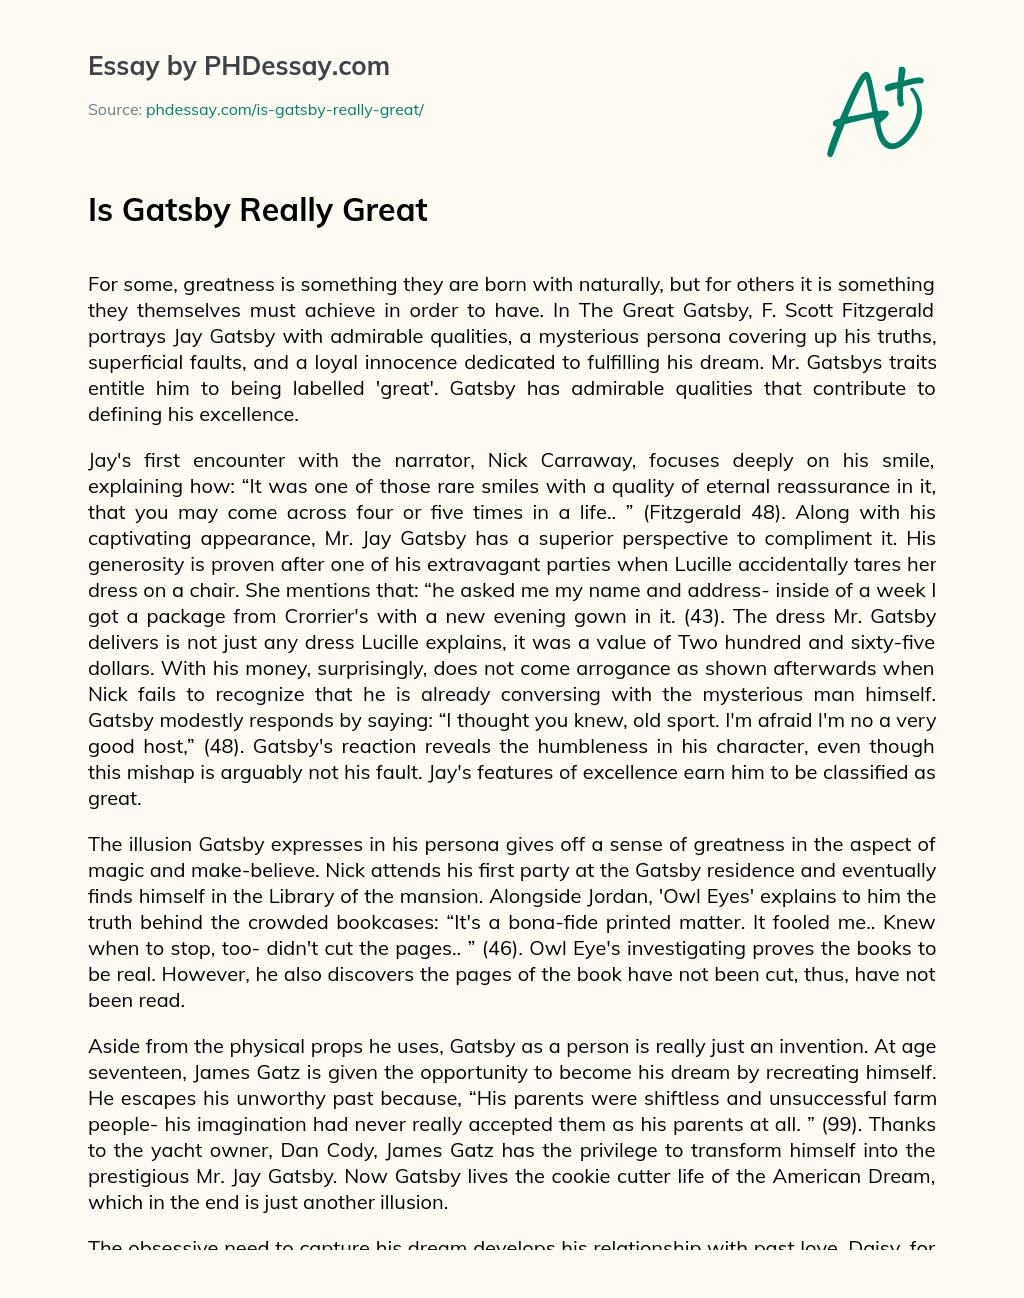 Is Gatsby Really Great essay